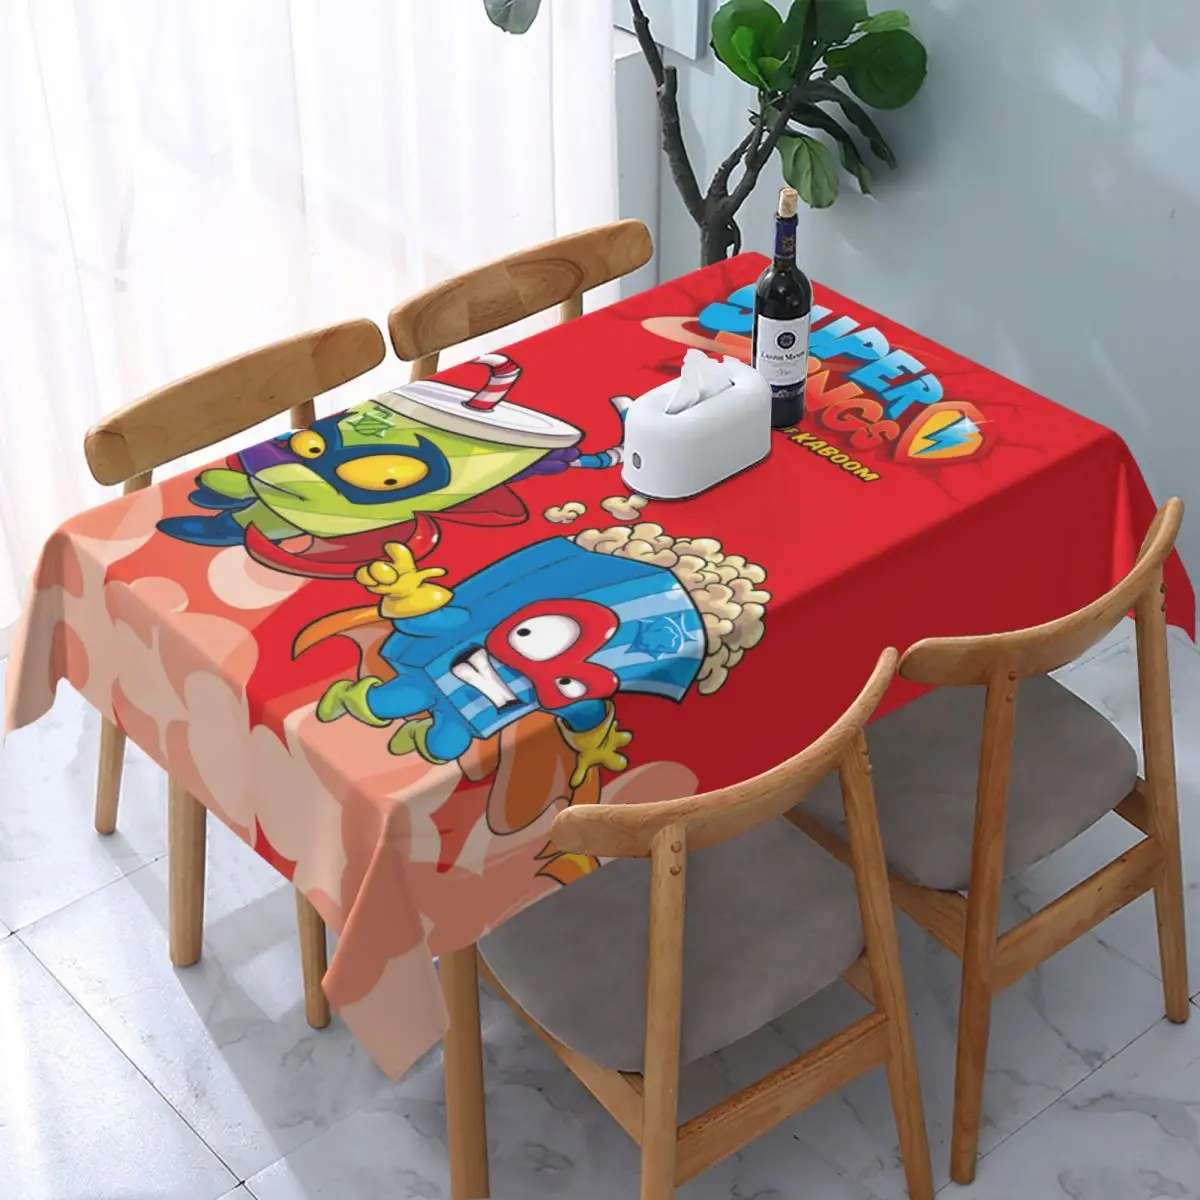 

Rectangular Waterproof Superzings Cartoon Table Cover Fitted Game Spuer Zings Table Cloth Backing Edge Tablecloth for Picnic